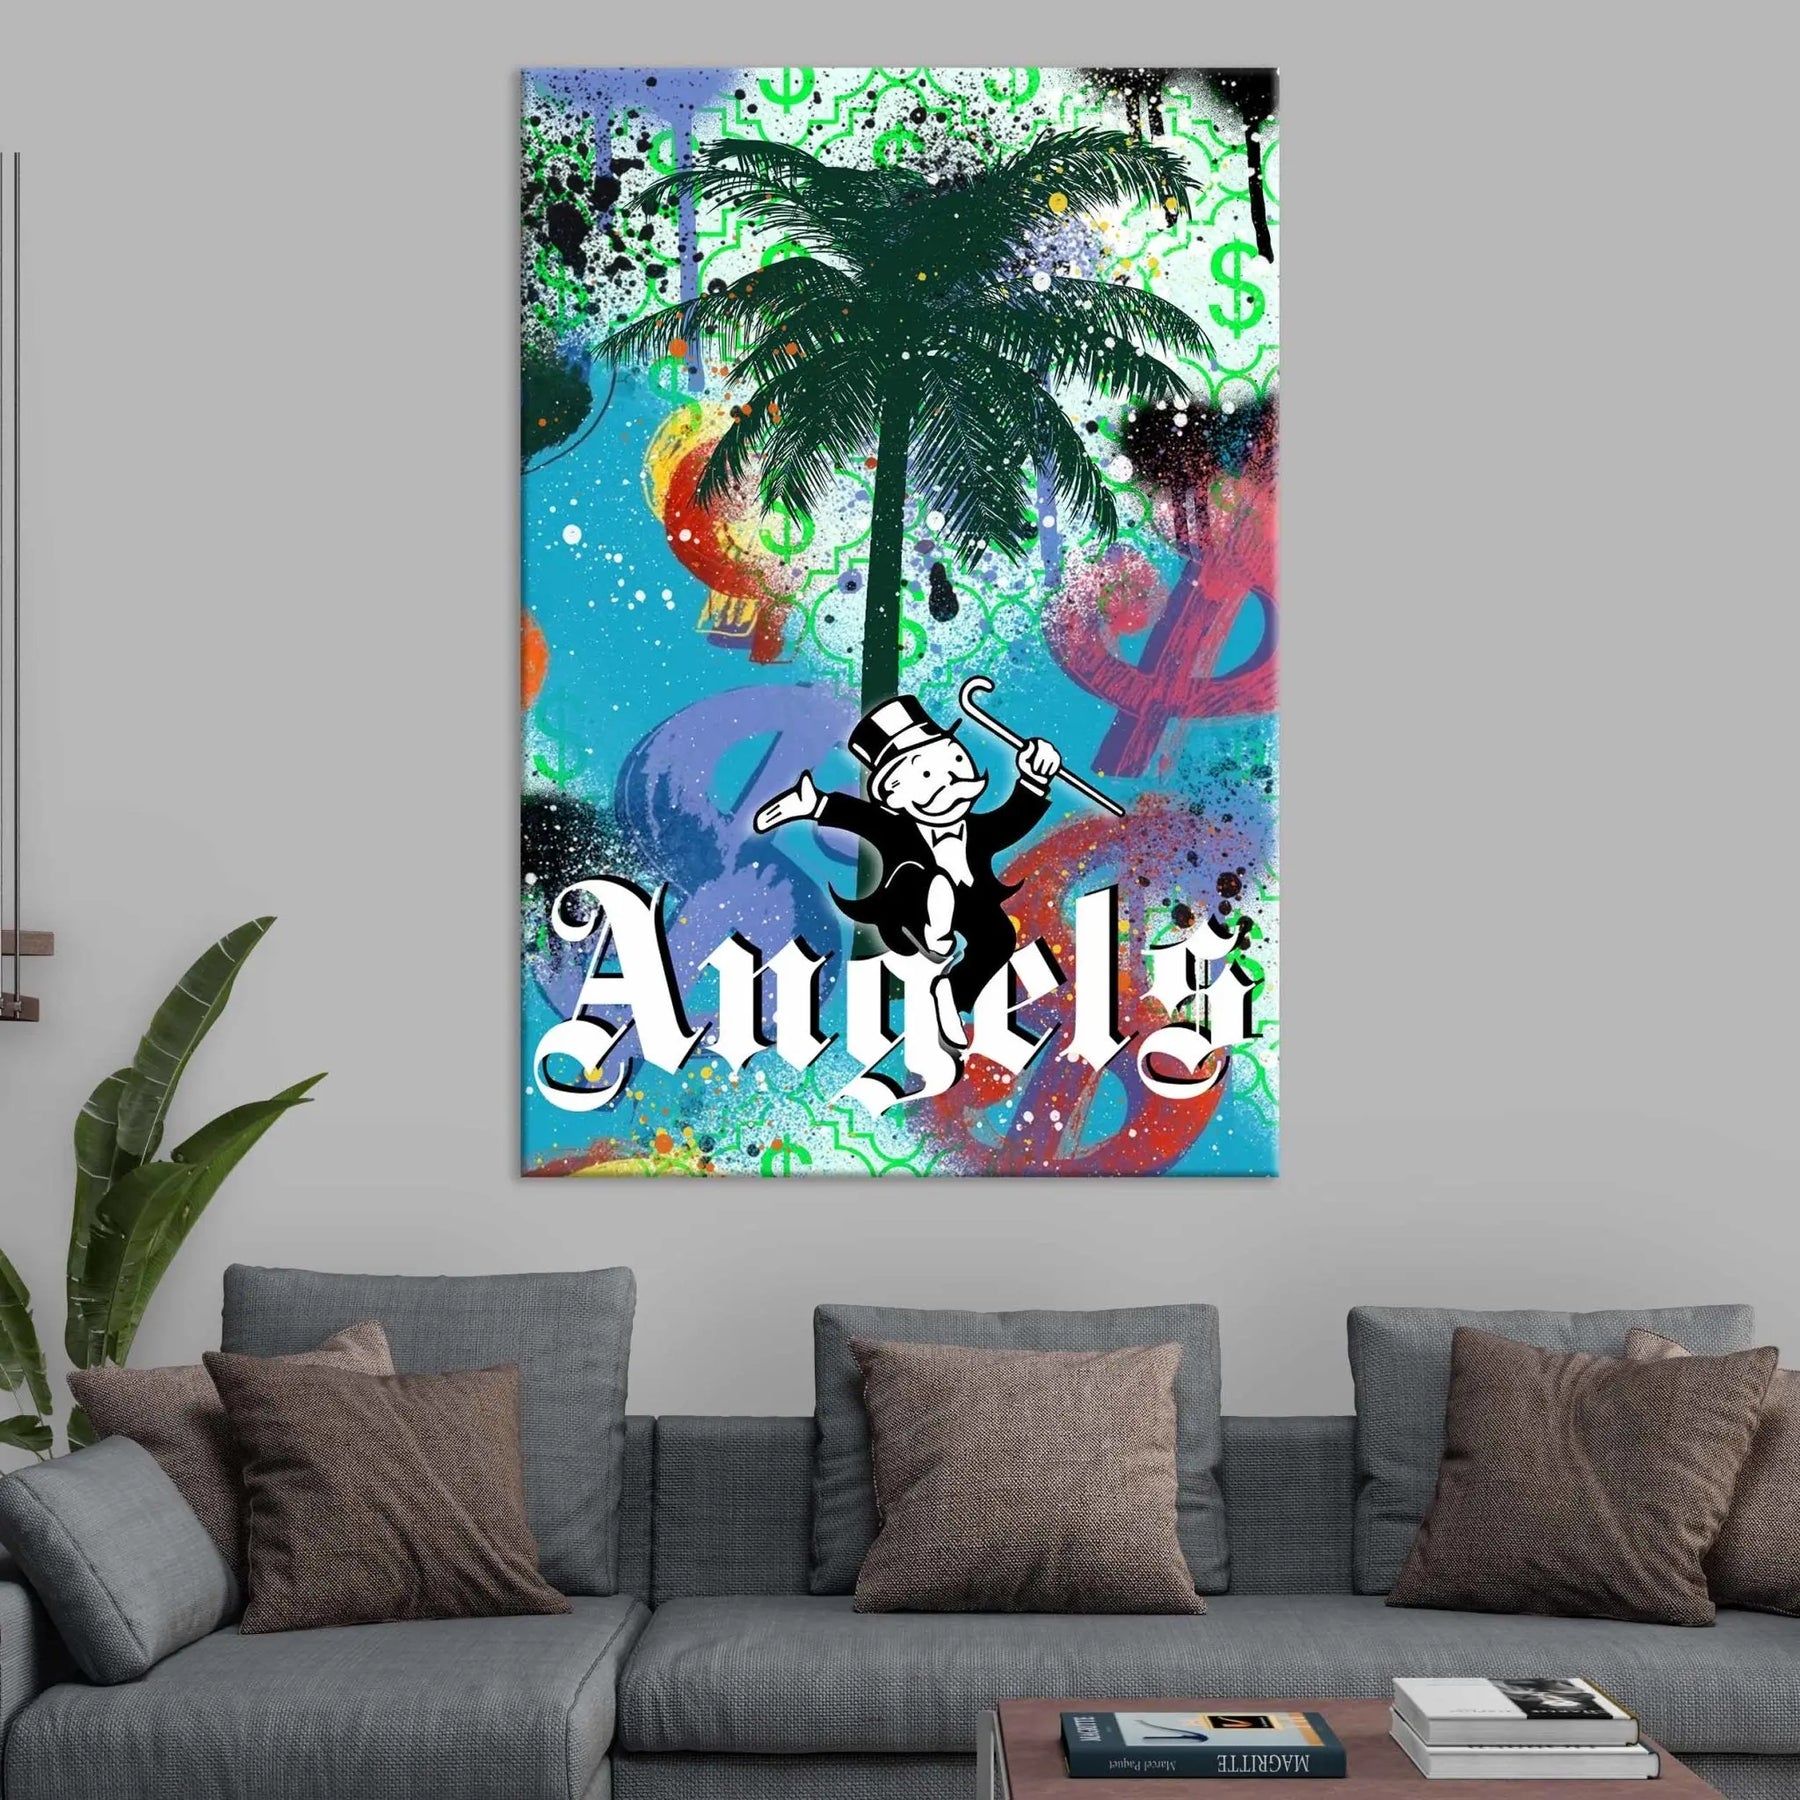 "ANGELS" - Art For Everyone